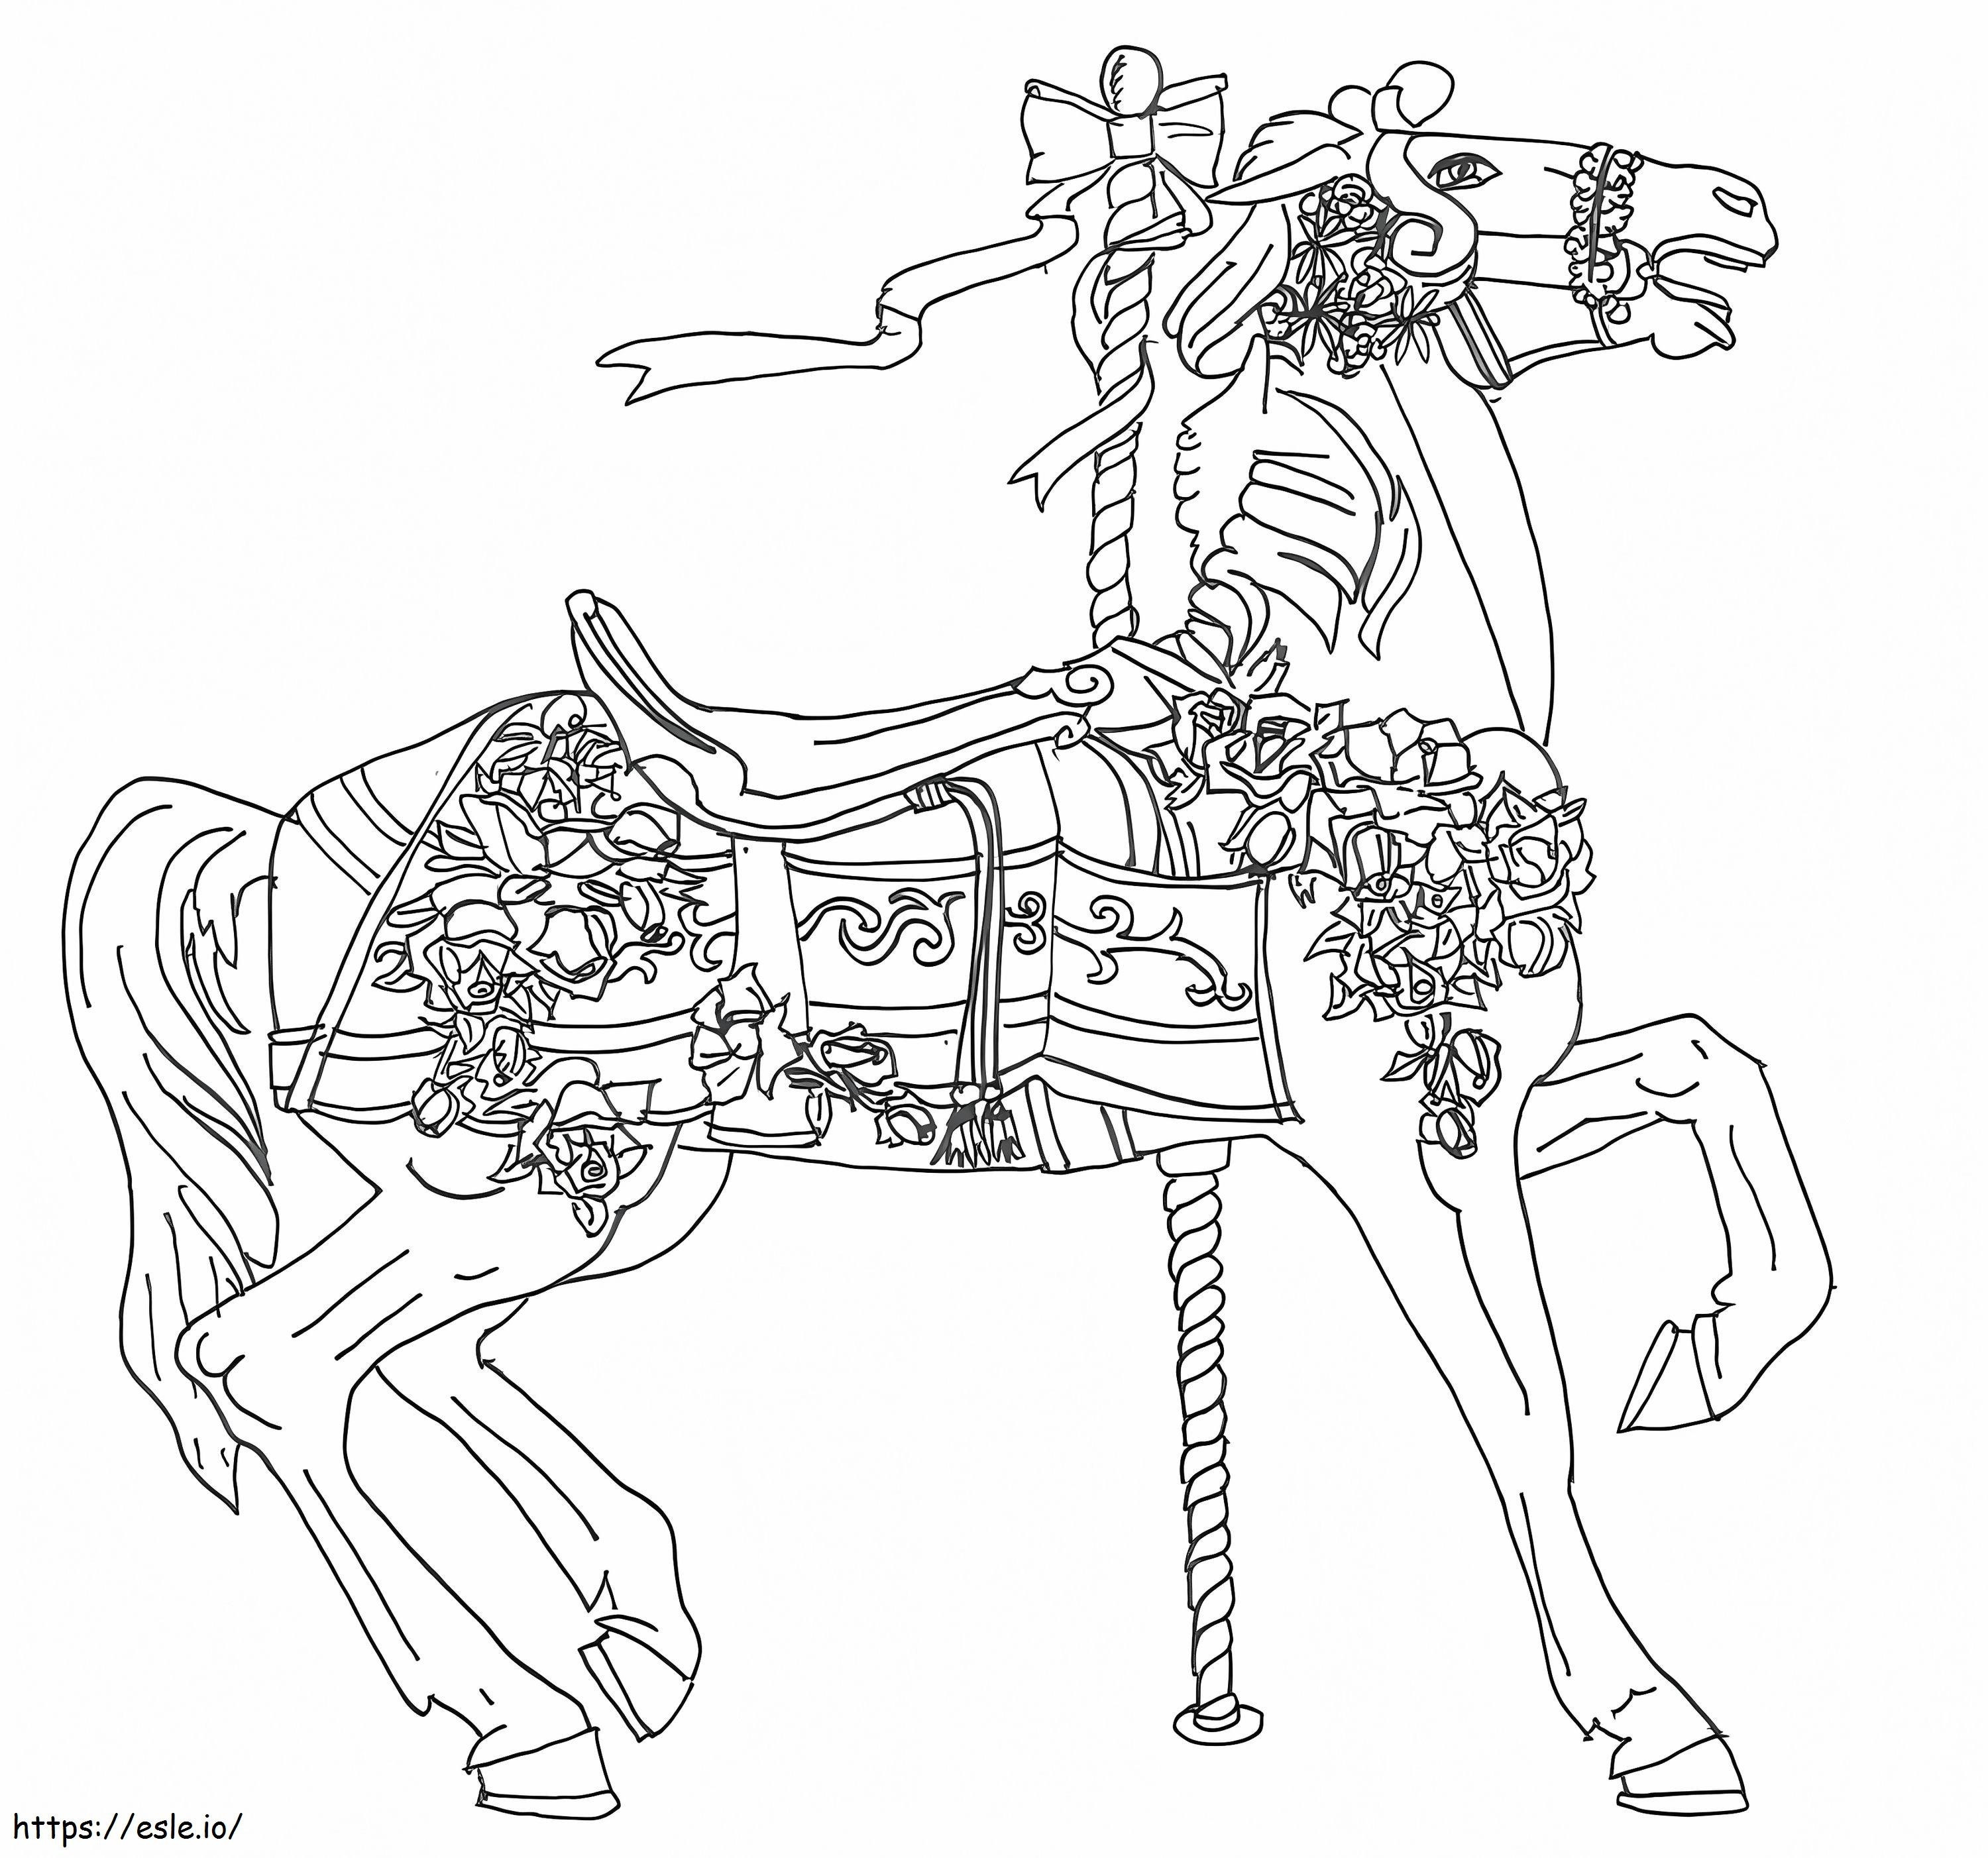 carousel horse coloring pages